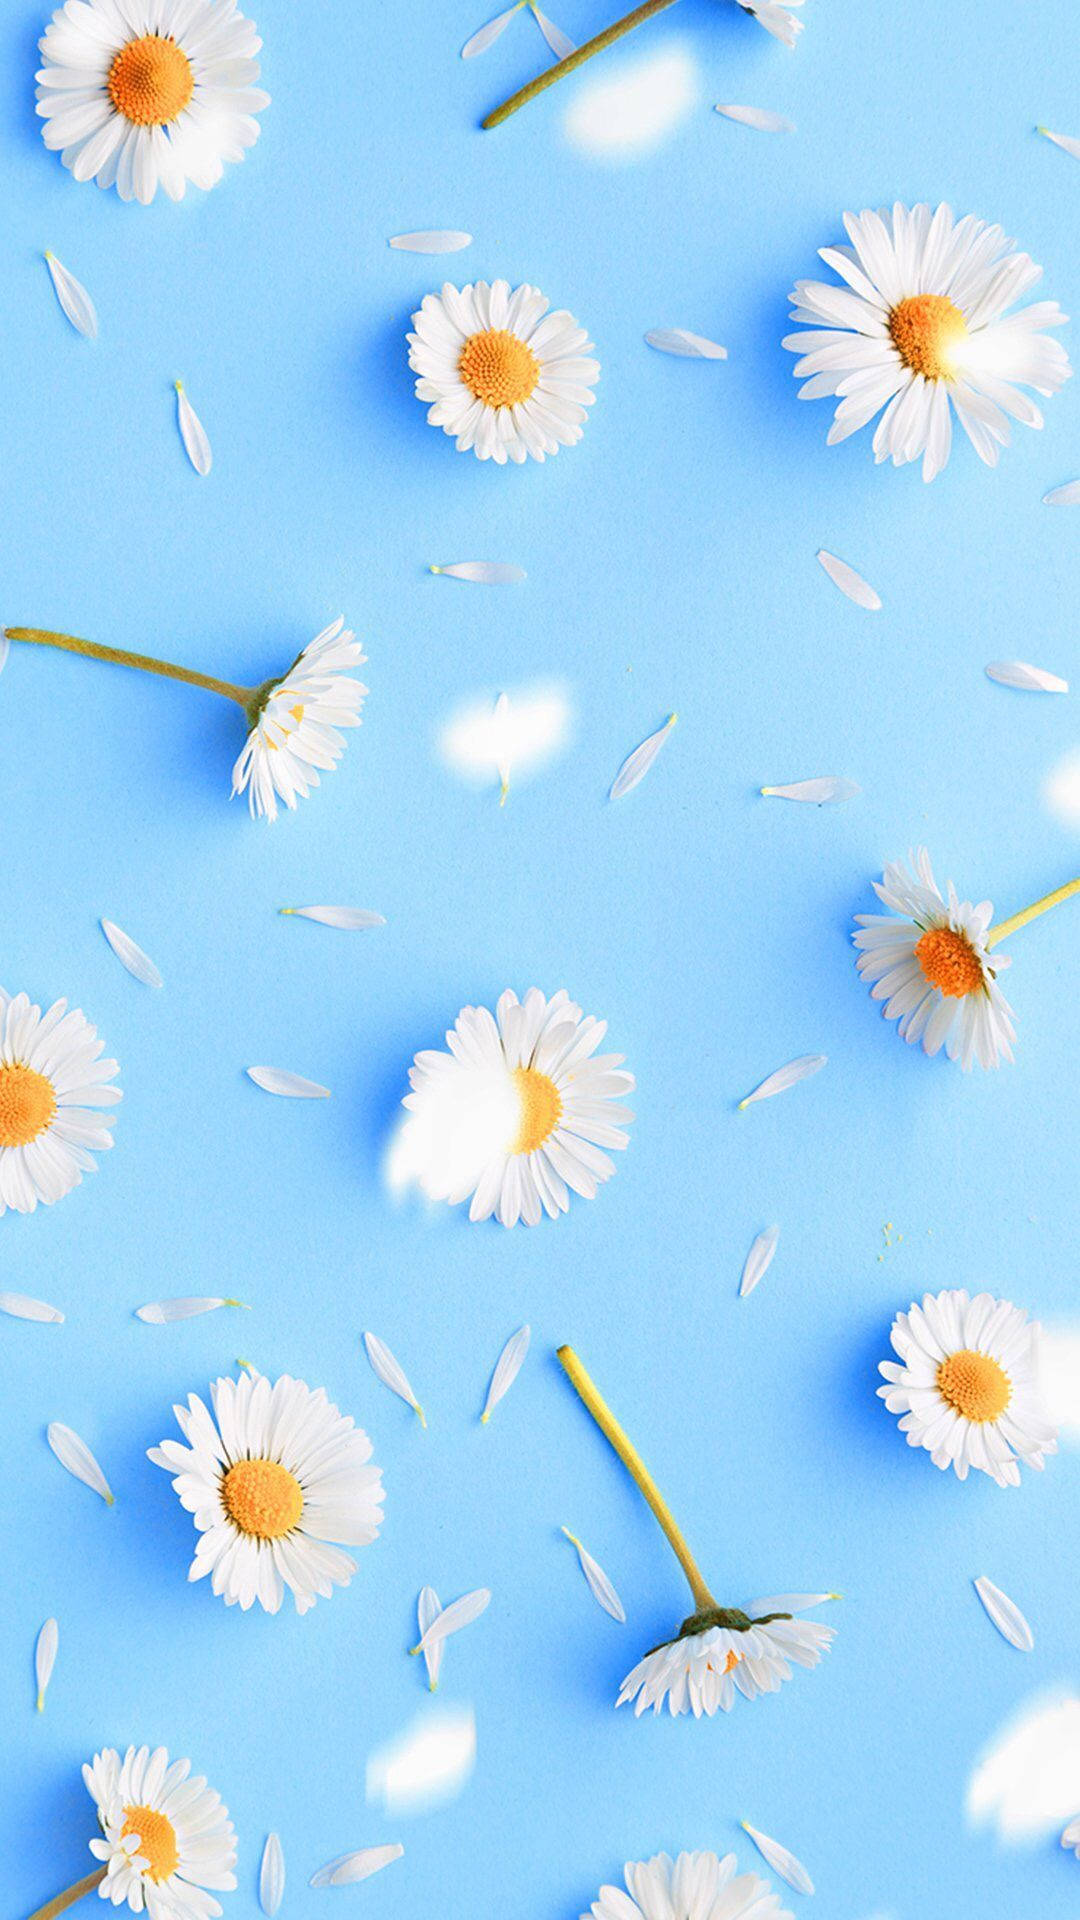 Page 2  Pastel Cute Daisy Wallpapers Images  Free Download on Freepik